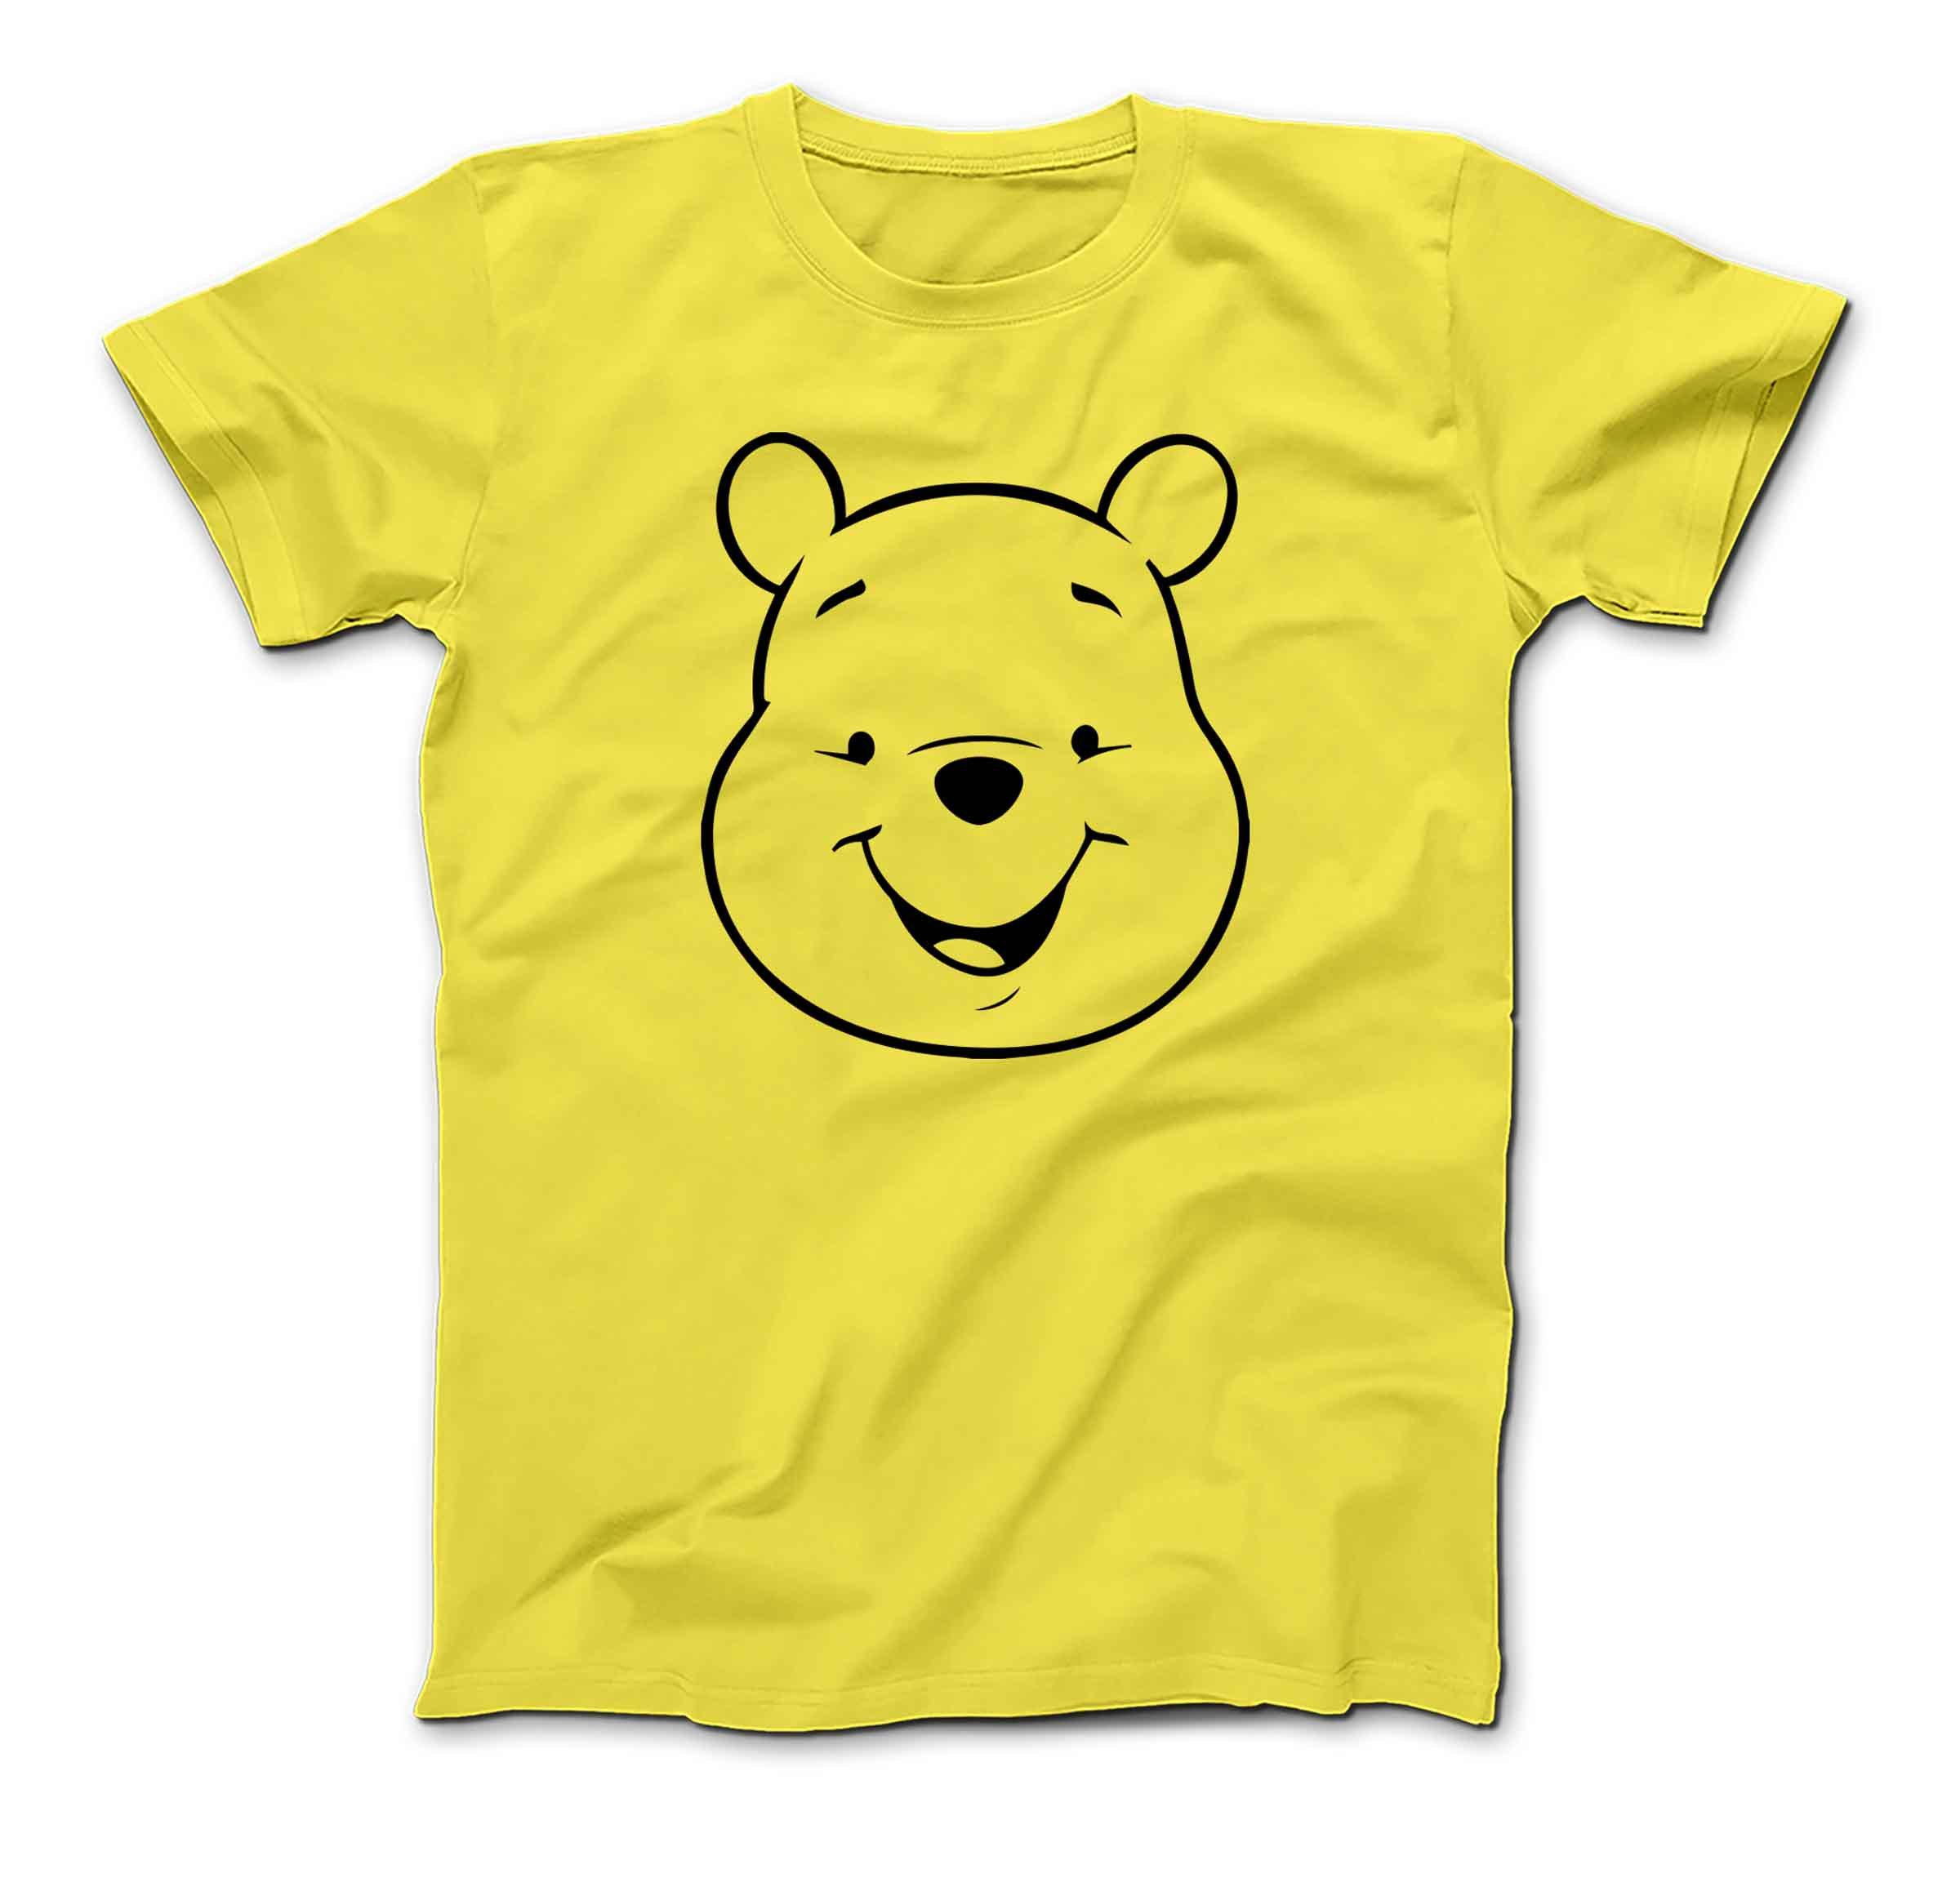 Winnie the pooh and friends mens shirt